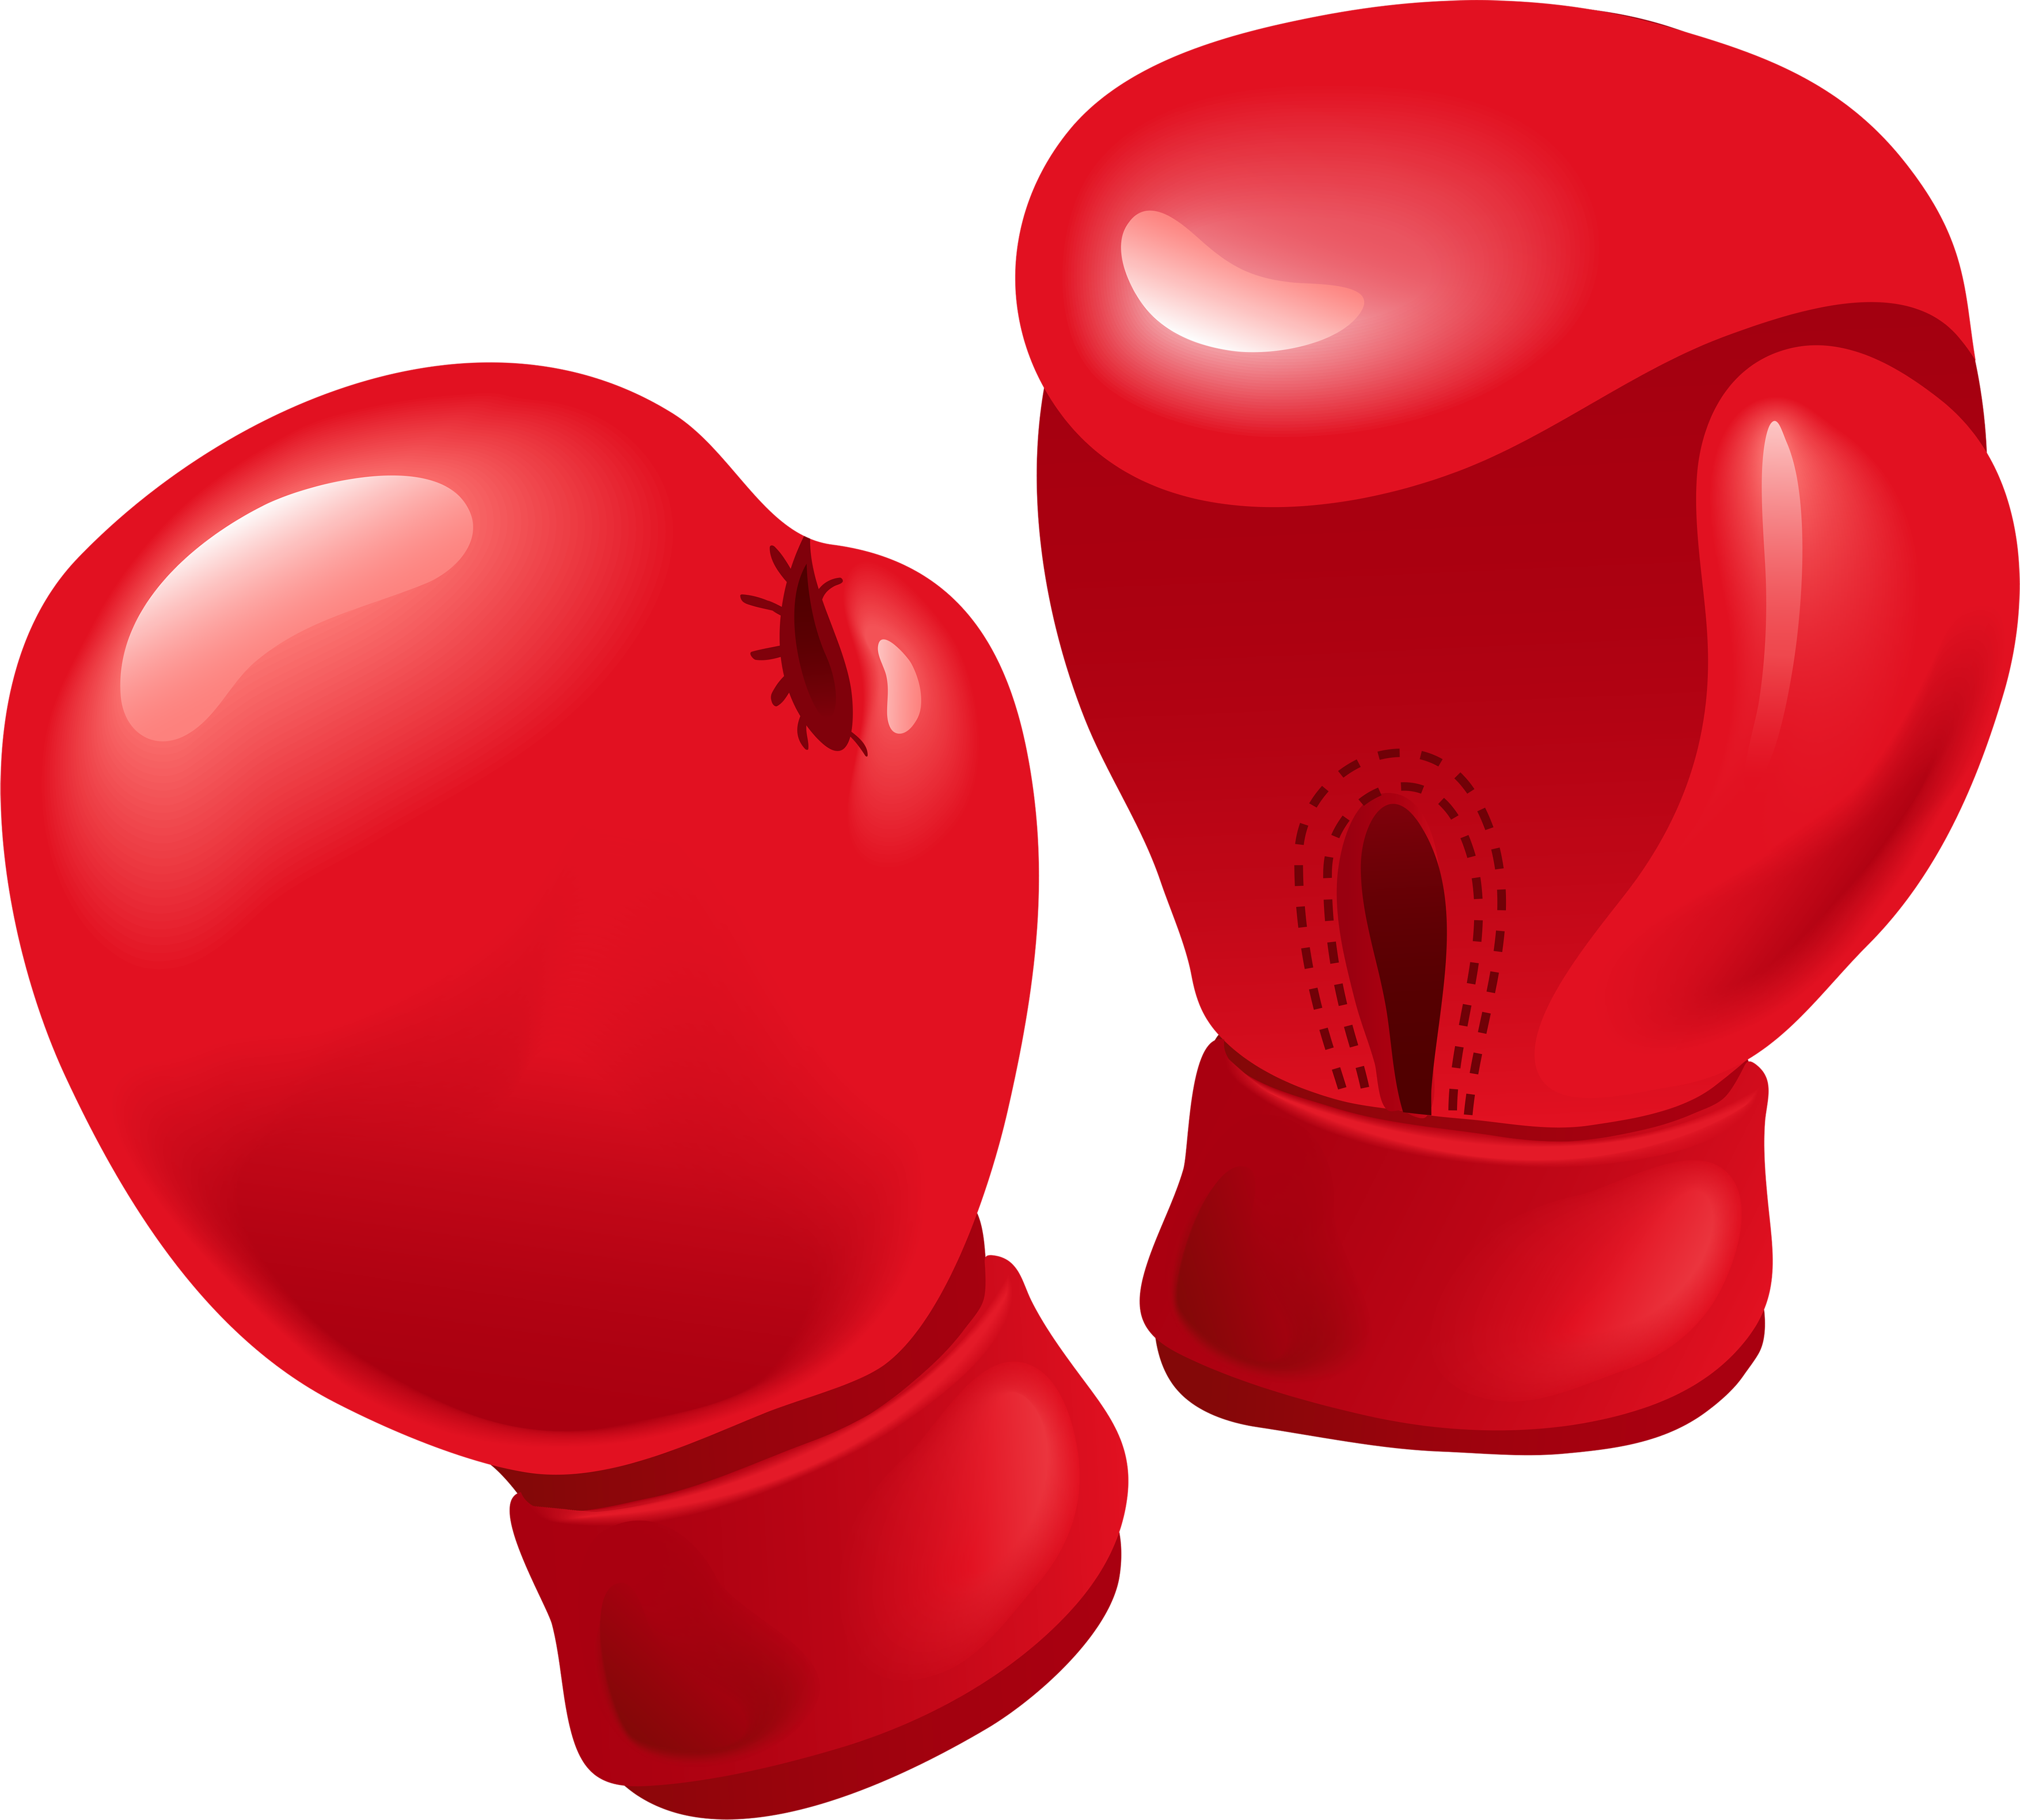 Boxing gloves PNG image free Download 